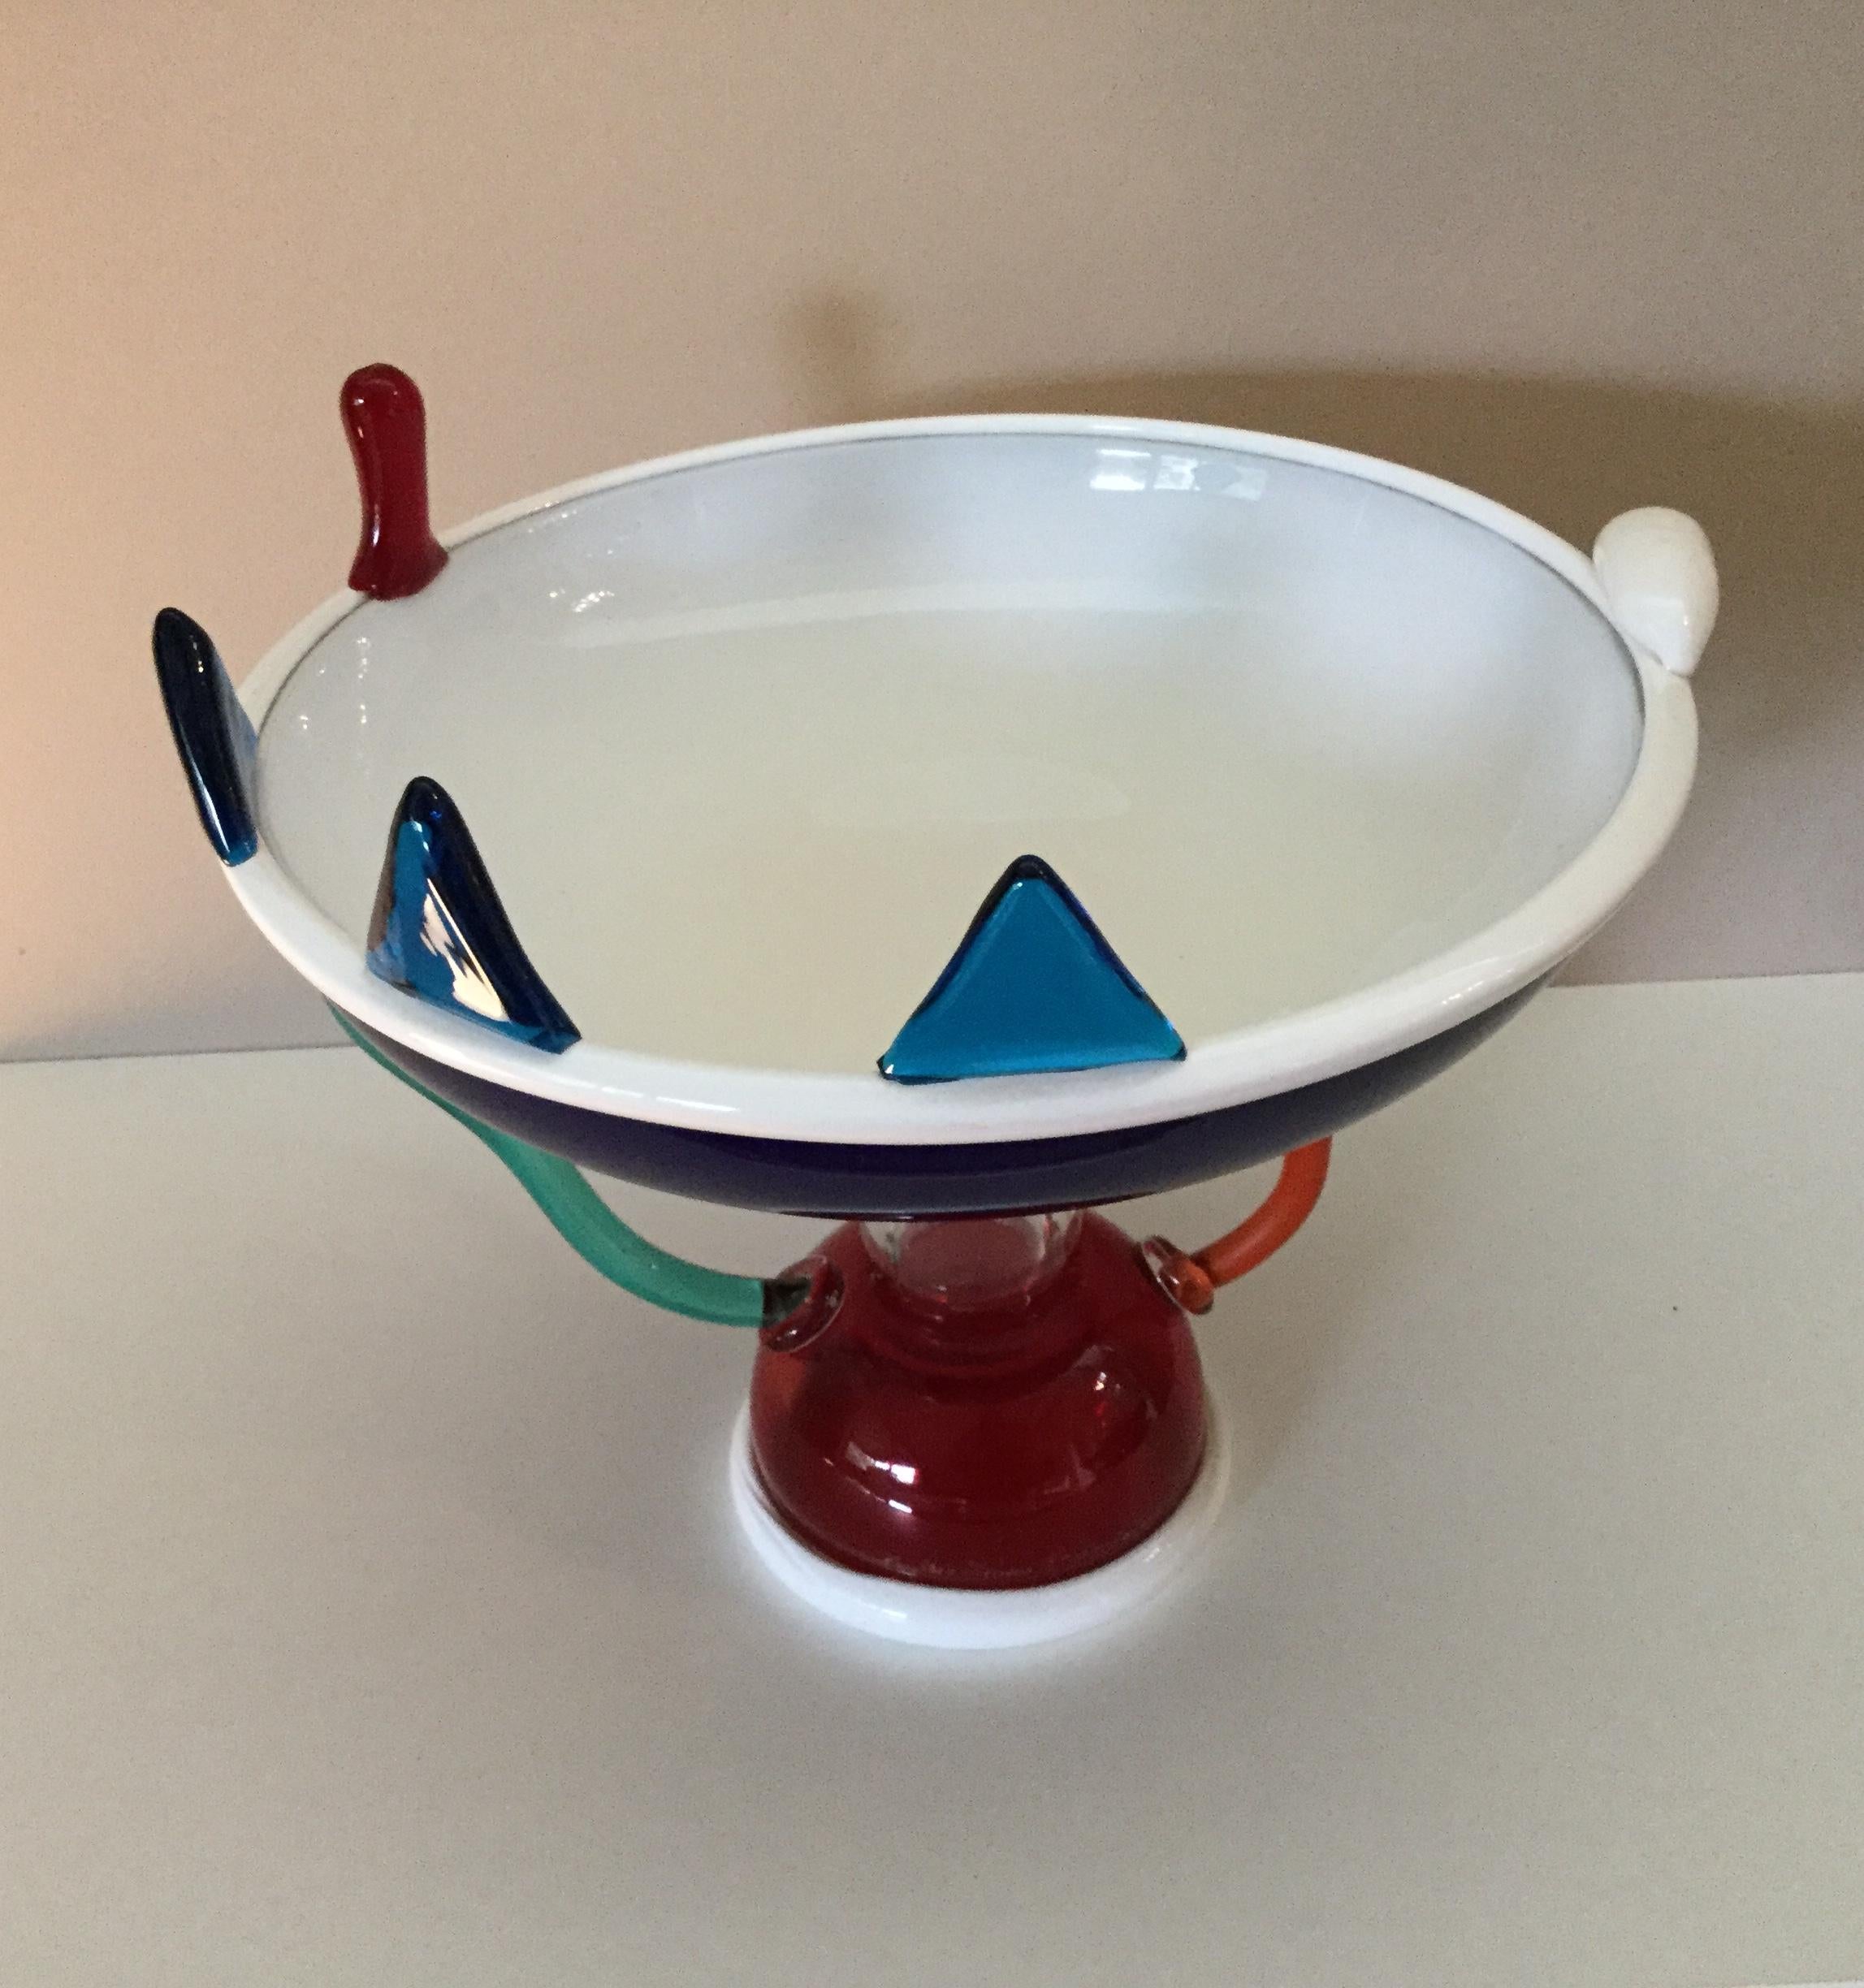 SOL centerpiece bowl designed by Ettore Sottsass. Signed as pictured.